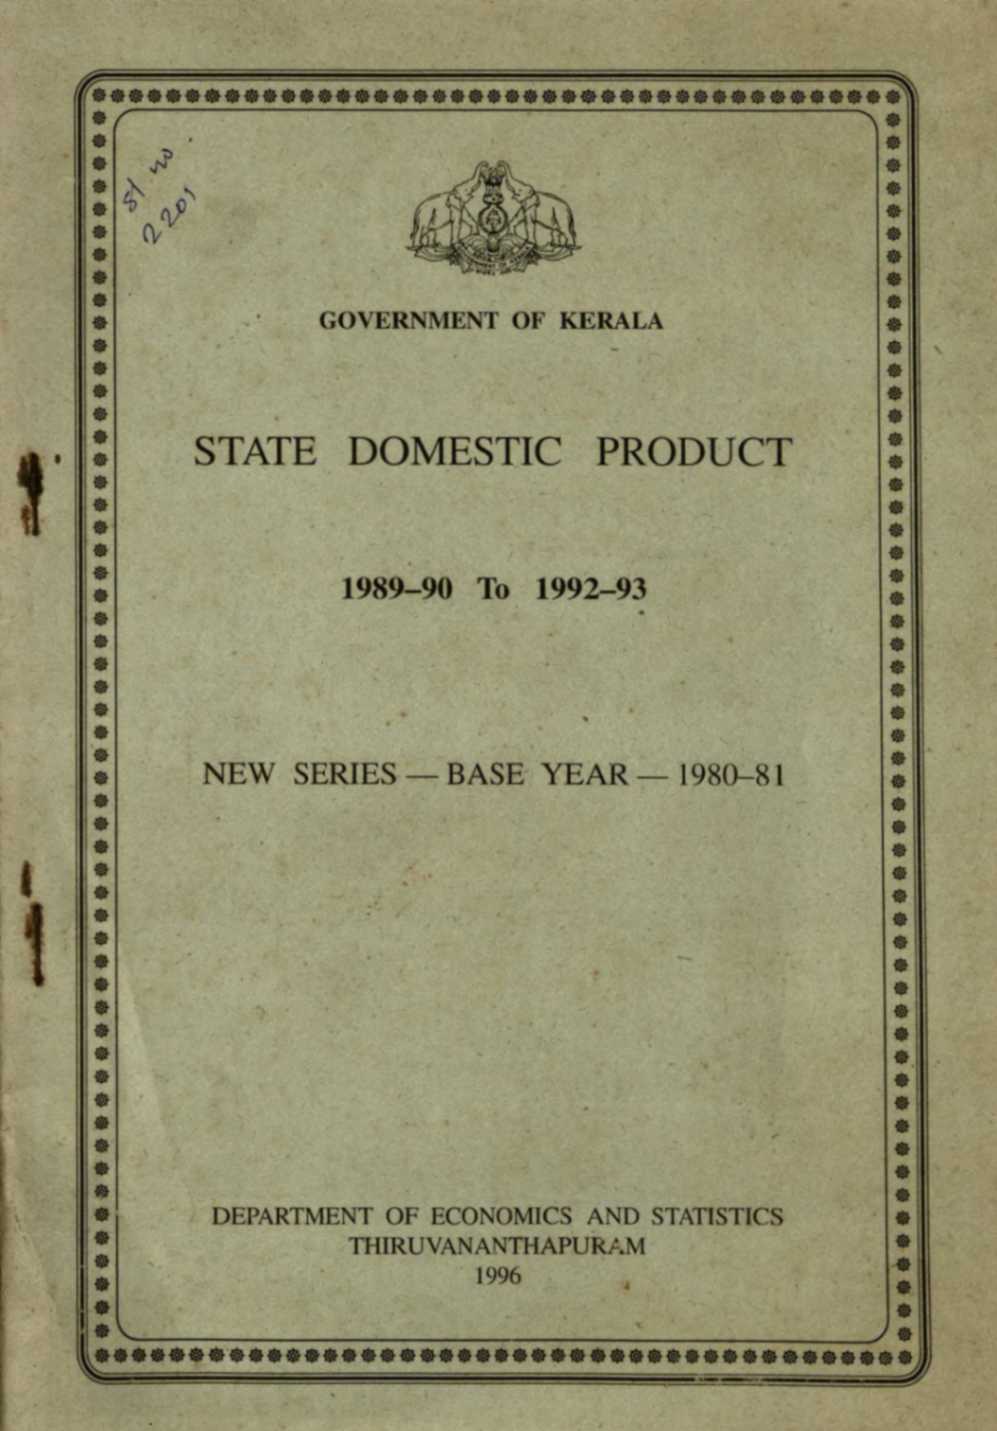 STATE DOMESTIC PRODUCT 1989-90 TO 1992-93